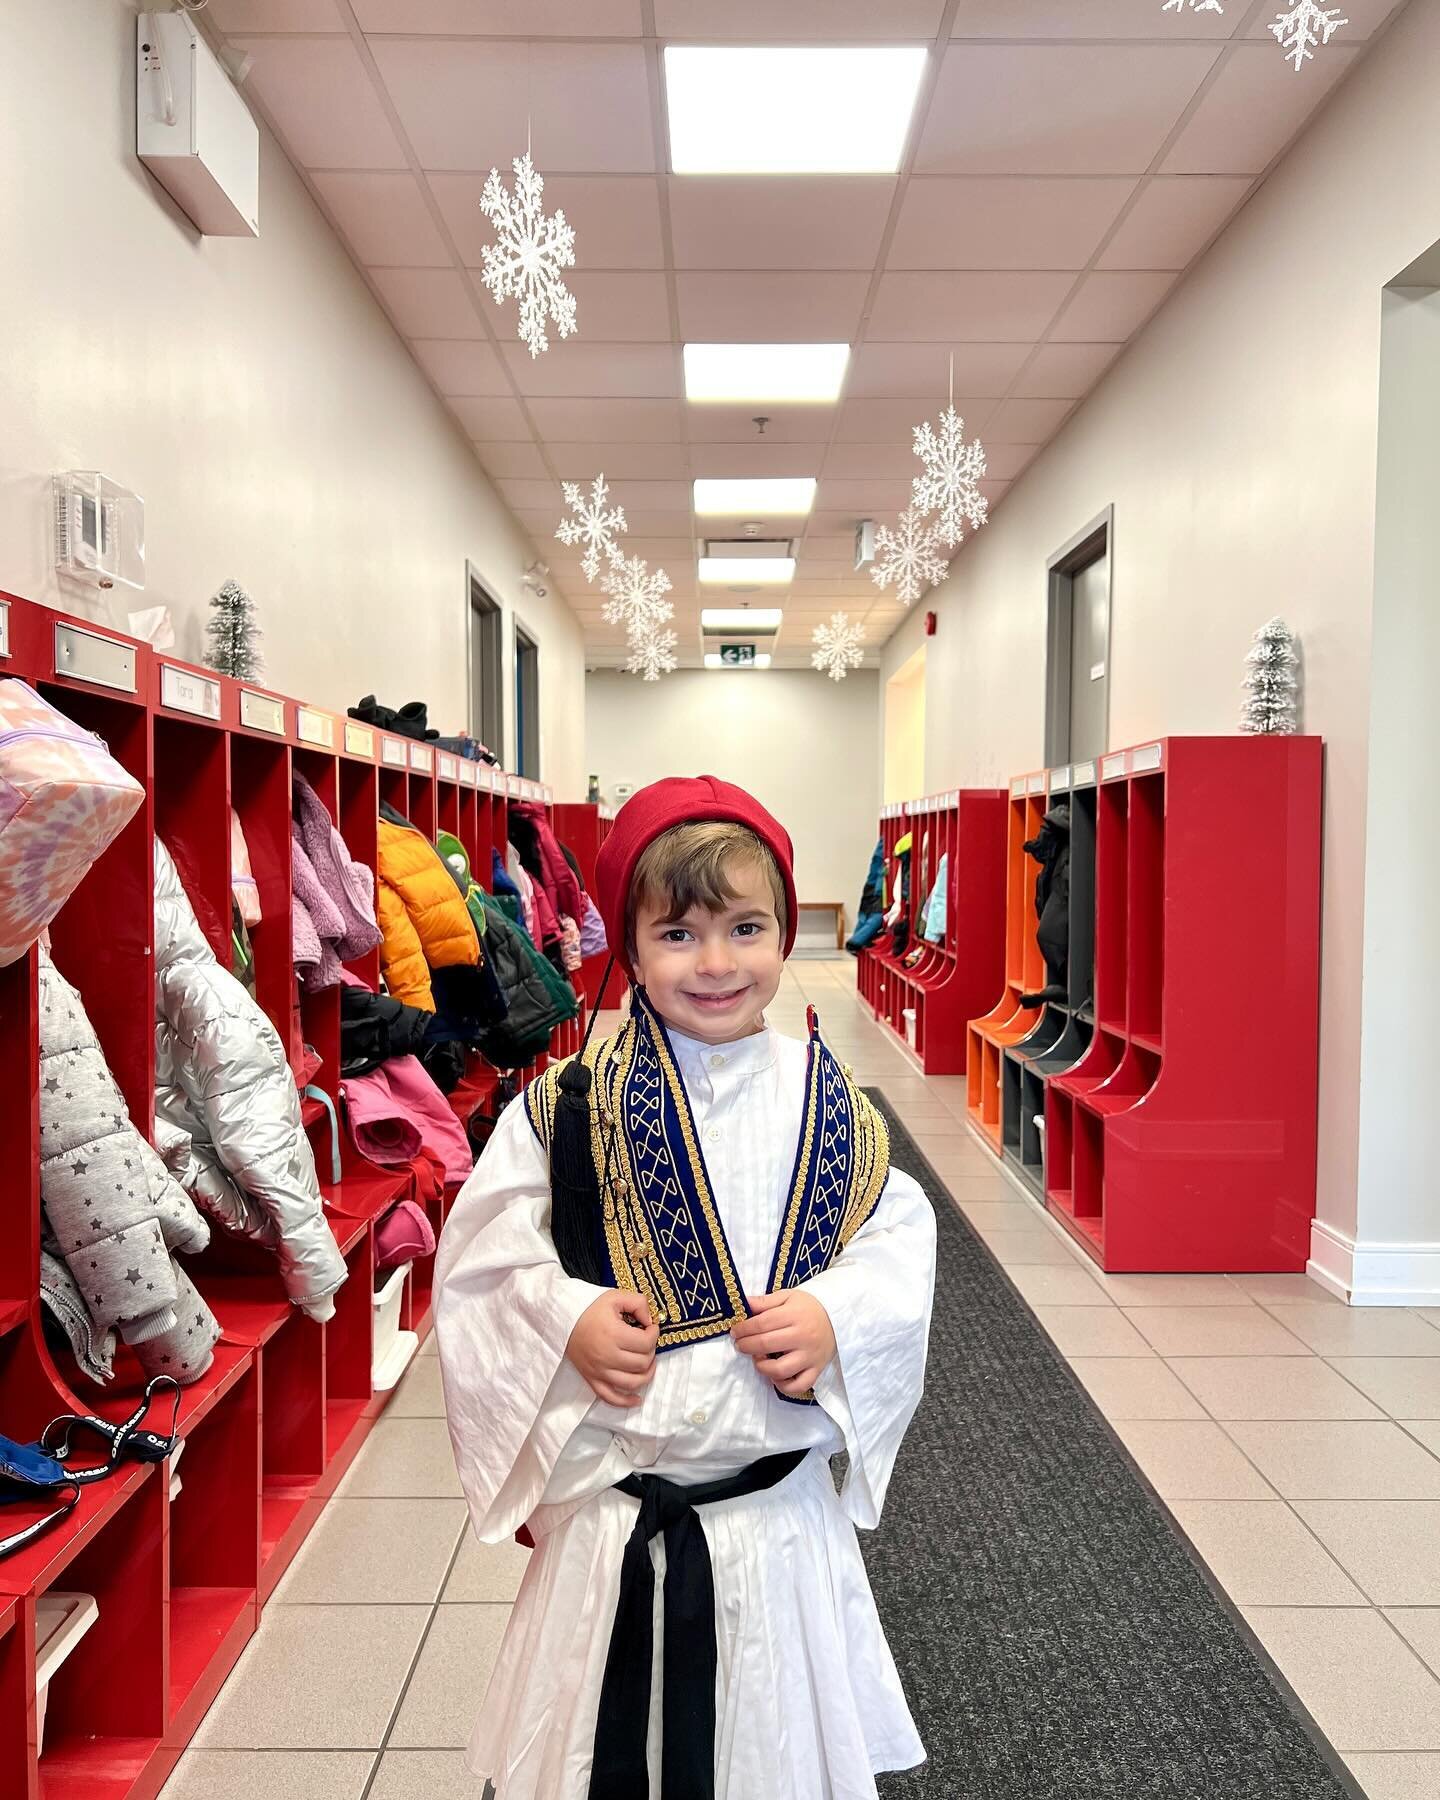 Today is Culture Day at Laurel 🌎 

a day where our students learn about the different cultures in Canada which helps them learn more about the world.

Pictured here is one of our Preschool students wearing a traditional Greek outfit 🇬🇷

*this pict